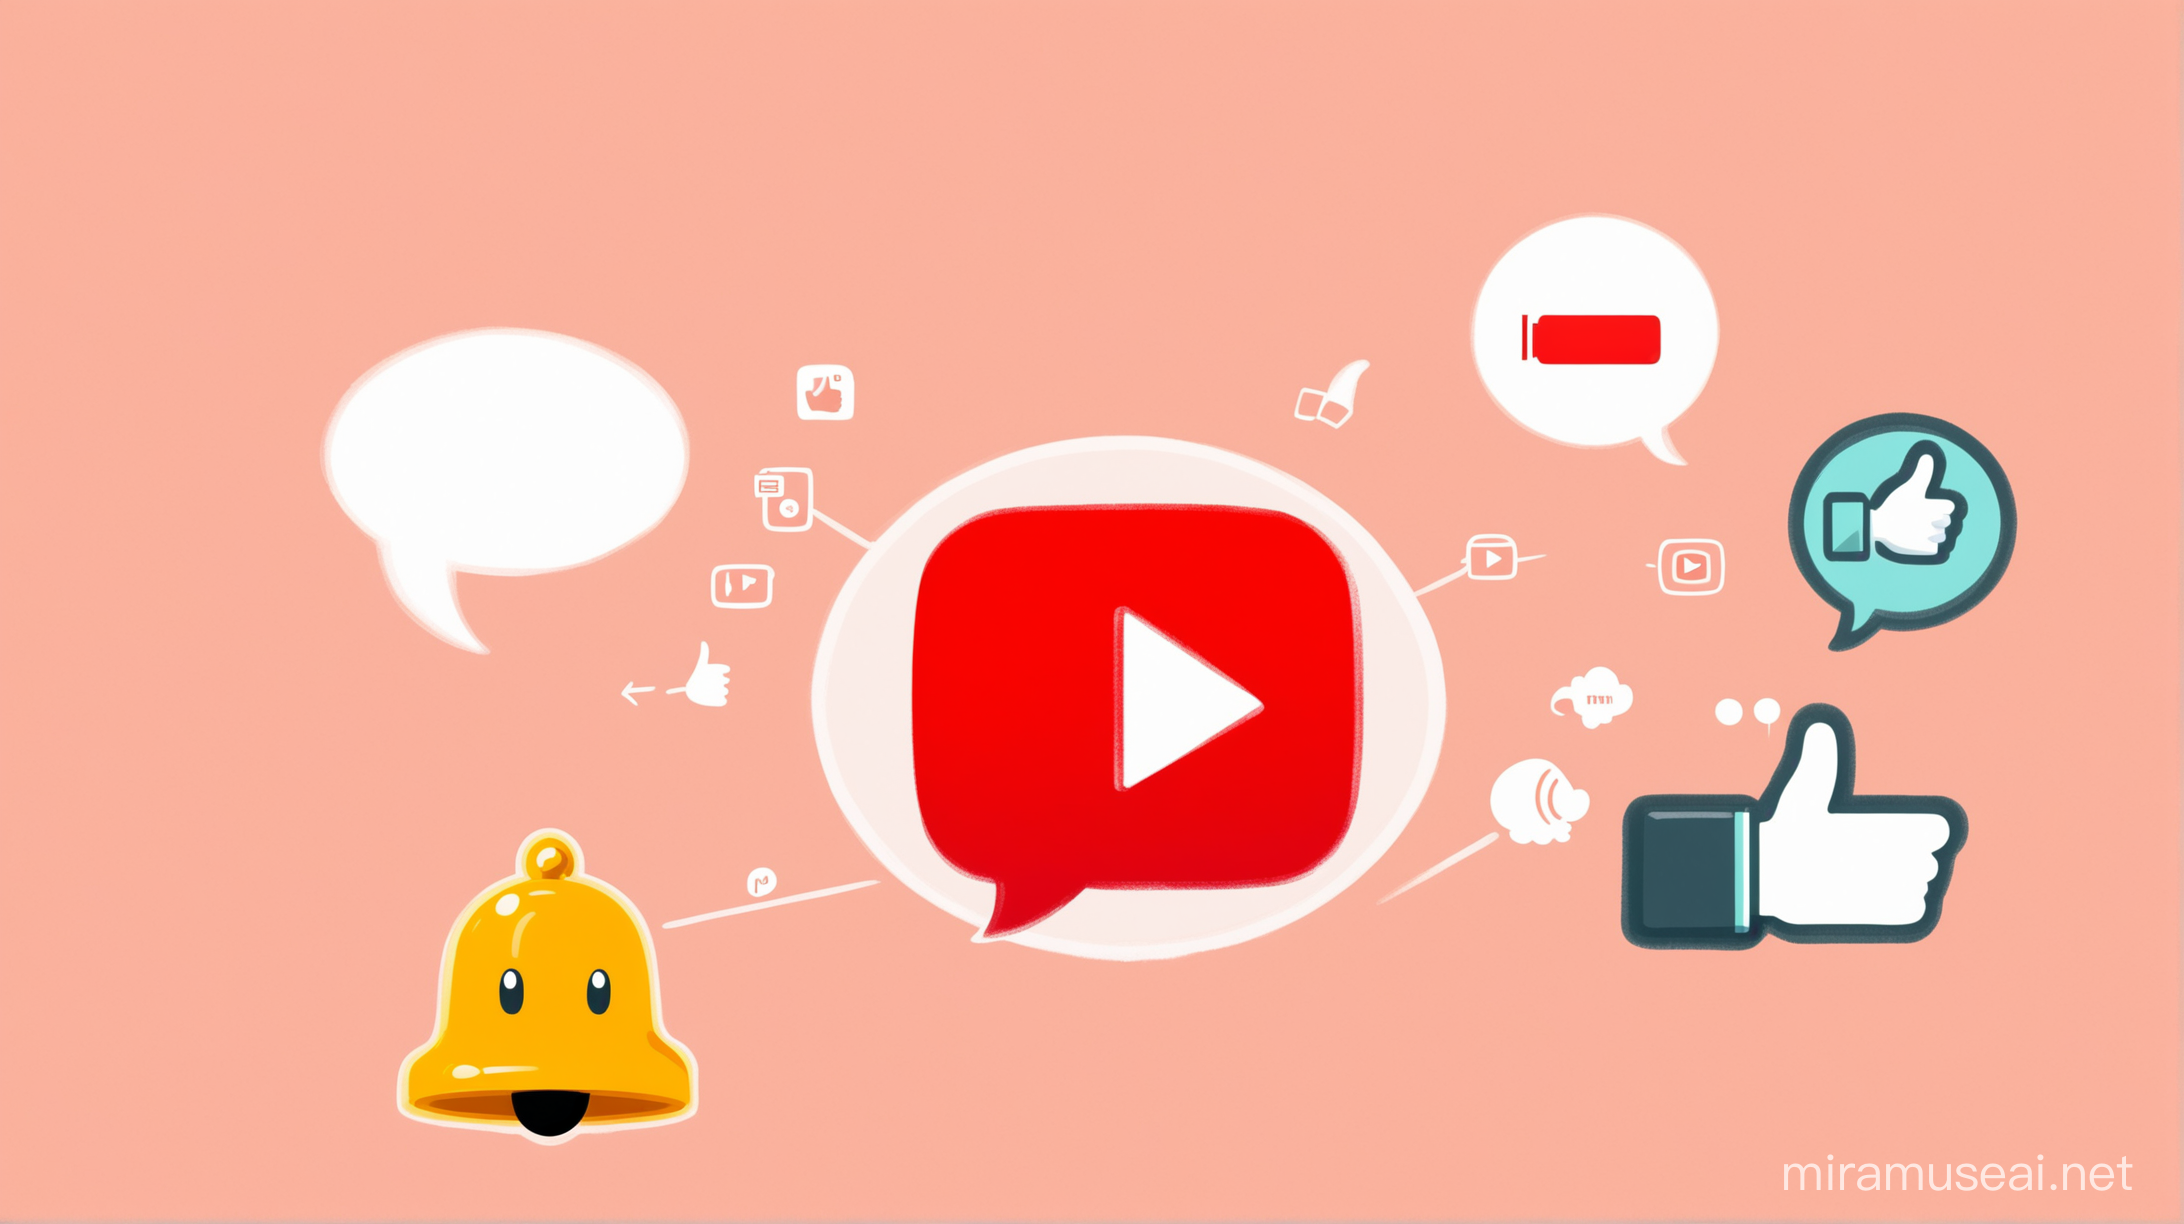 YouTube Symbols Thumb Up Comment Bubble Subscription Bell